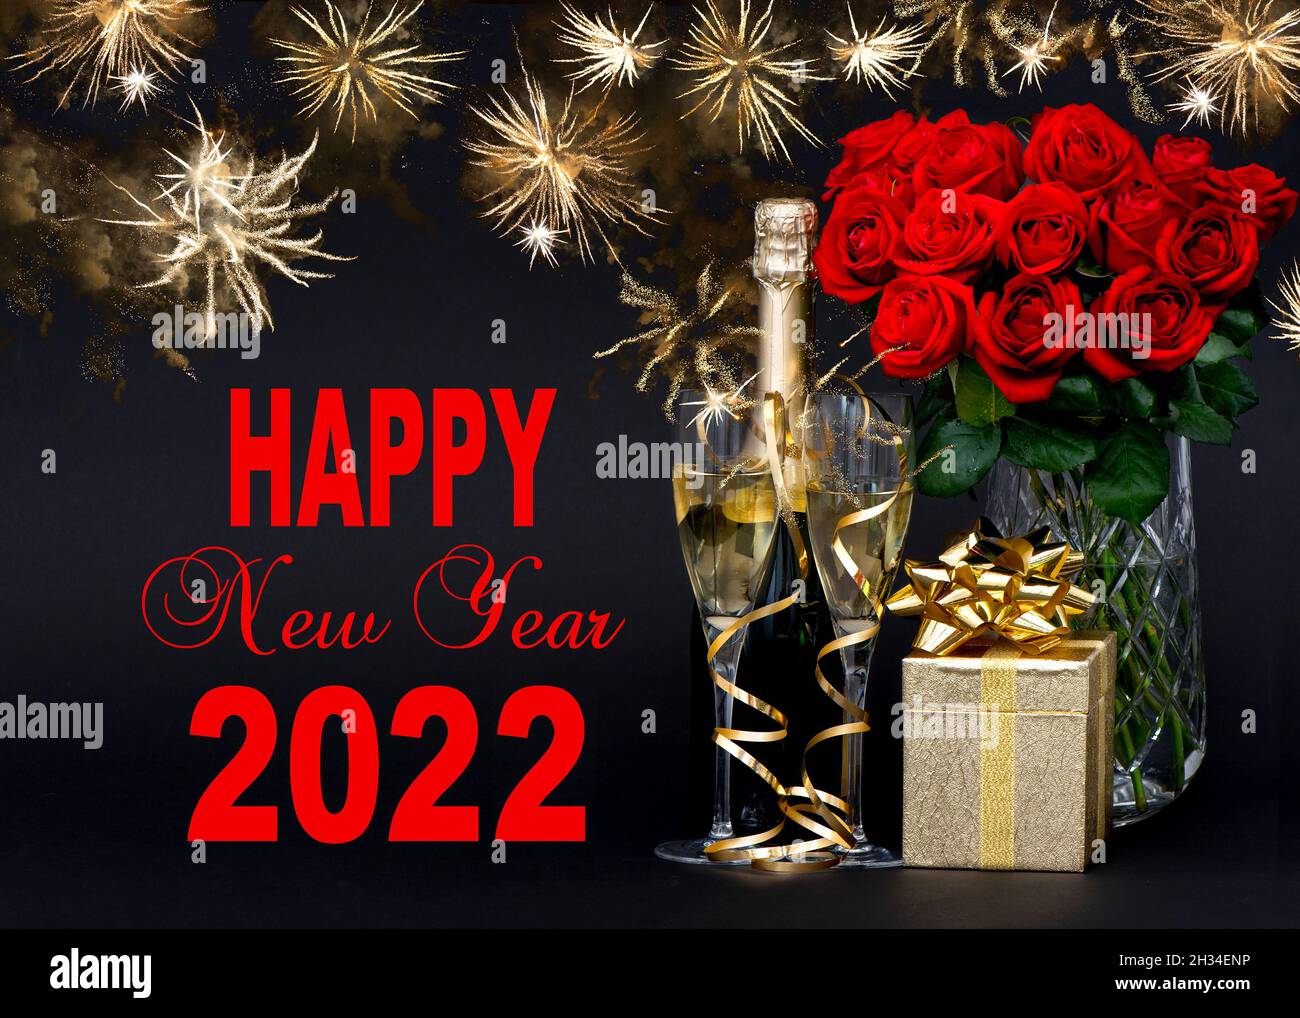 Happy New Year 2022. Red roses, bottle of champagne, golden gift box Stock Photo